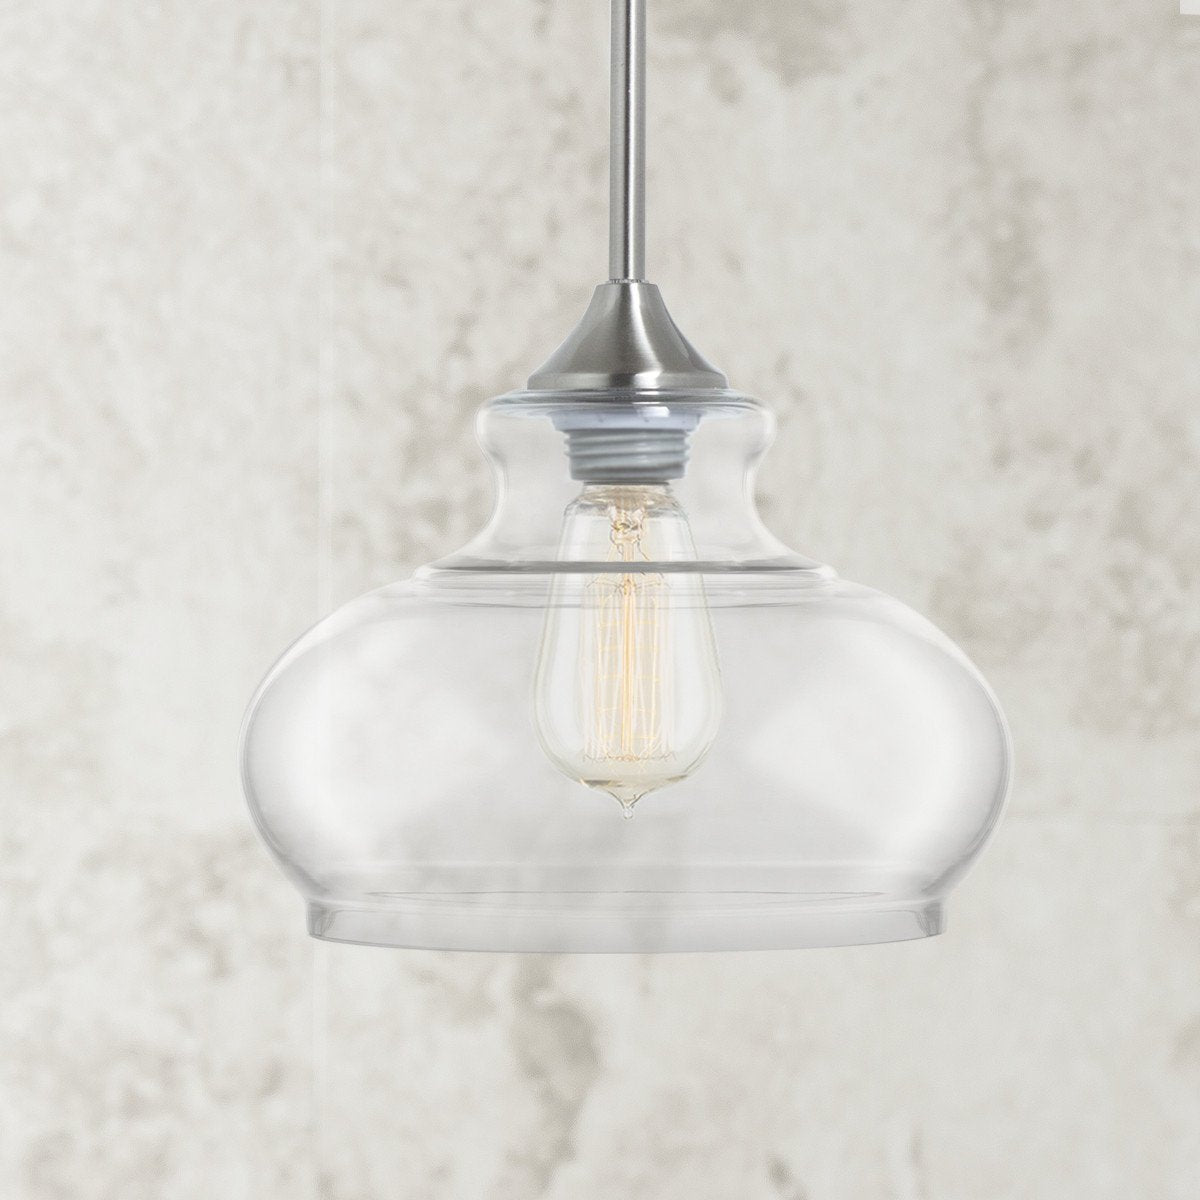 Linea Residential included Ovale Modern LED Lighting and | Affordable Light, Lighting | Ariella Pendant bulb